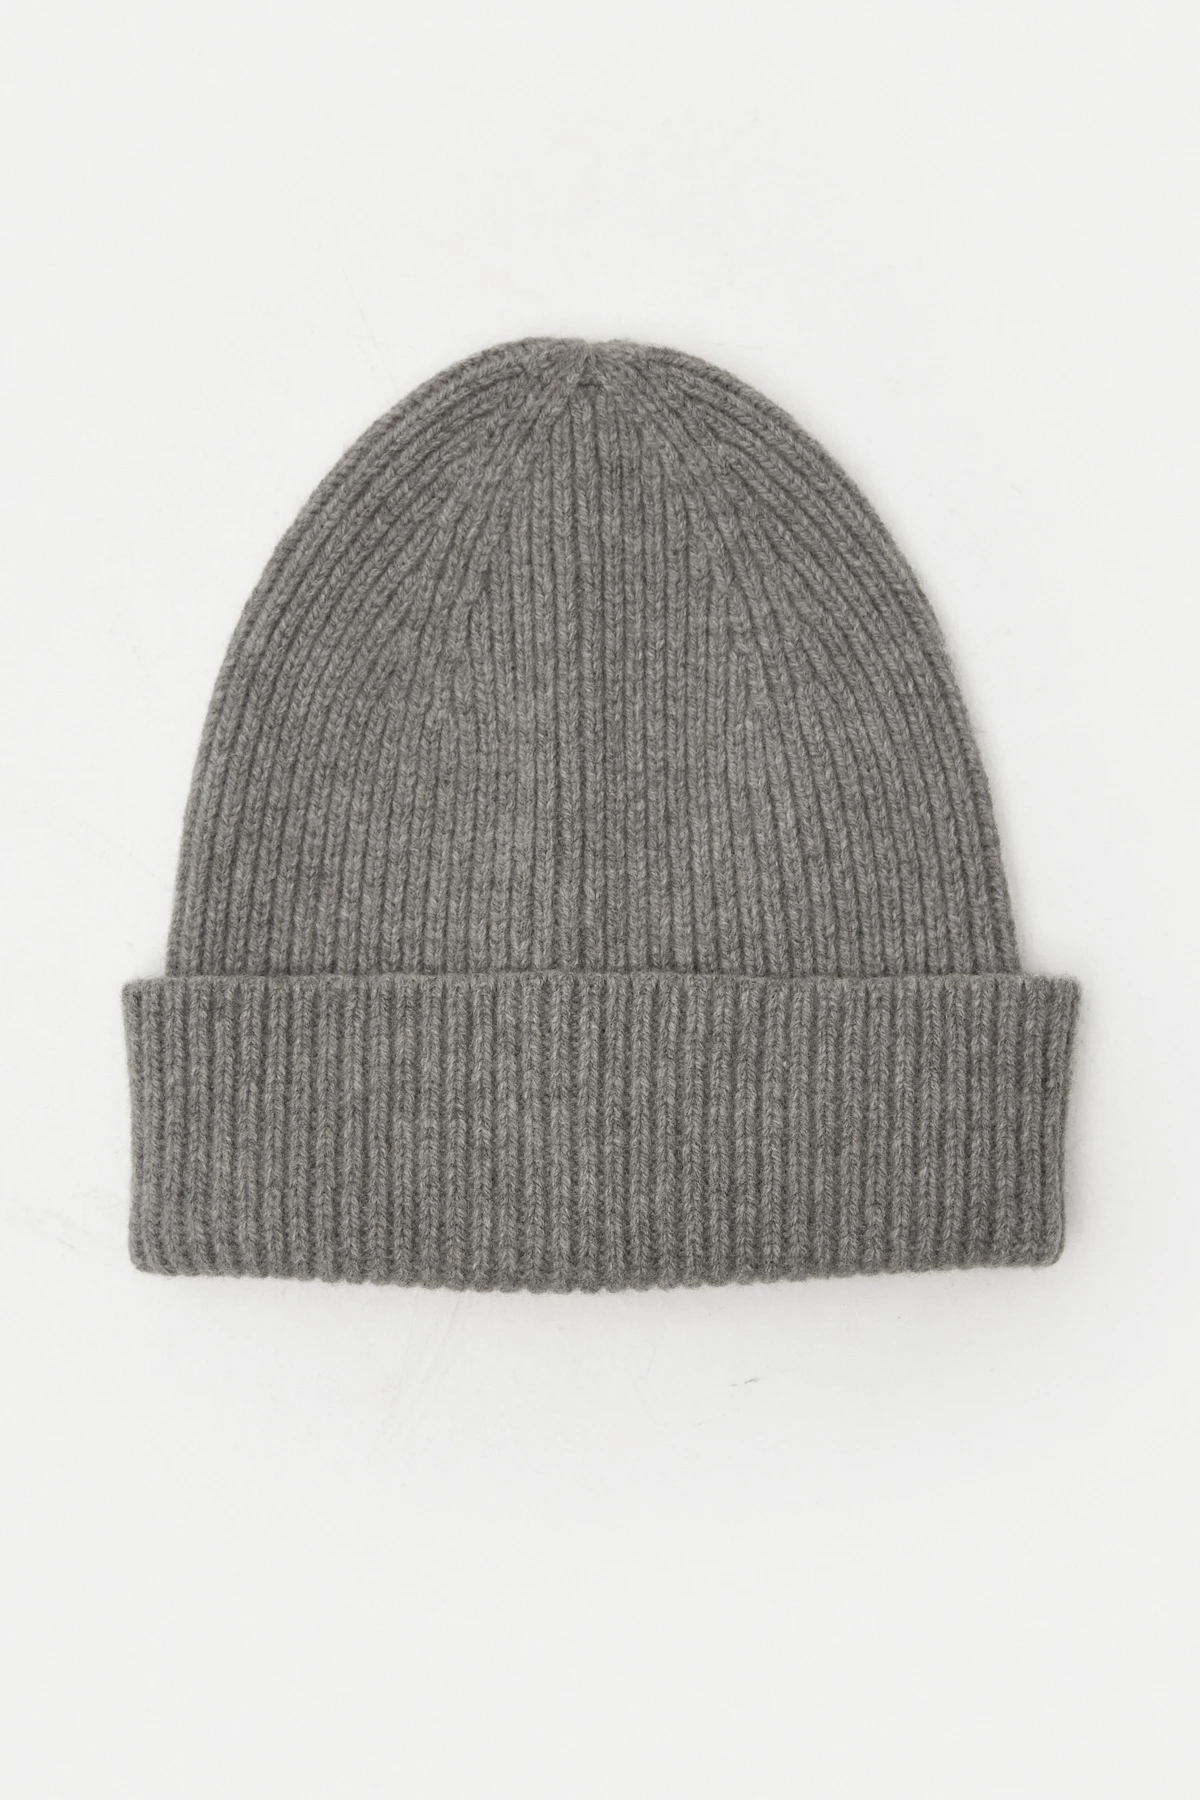 Knitted grey cashmere beanie hat with lapel, photo 4